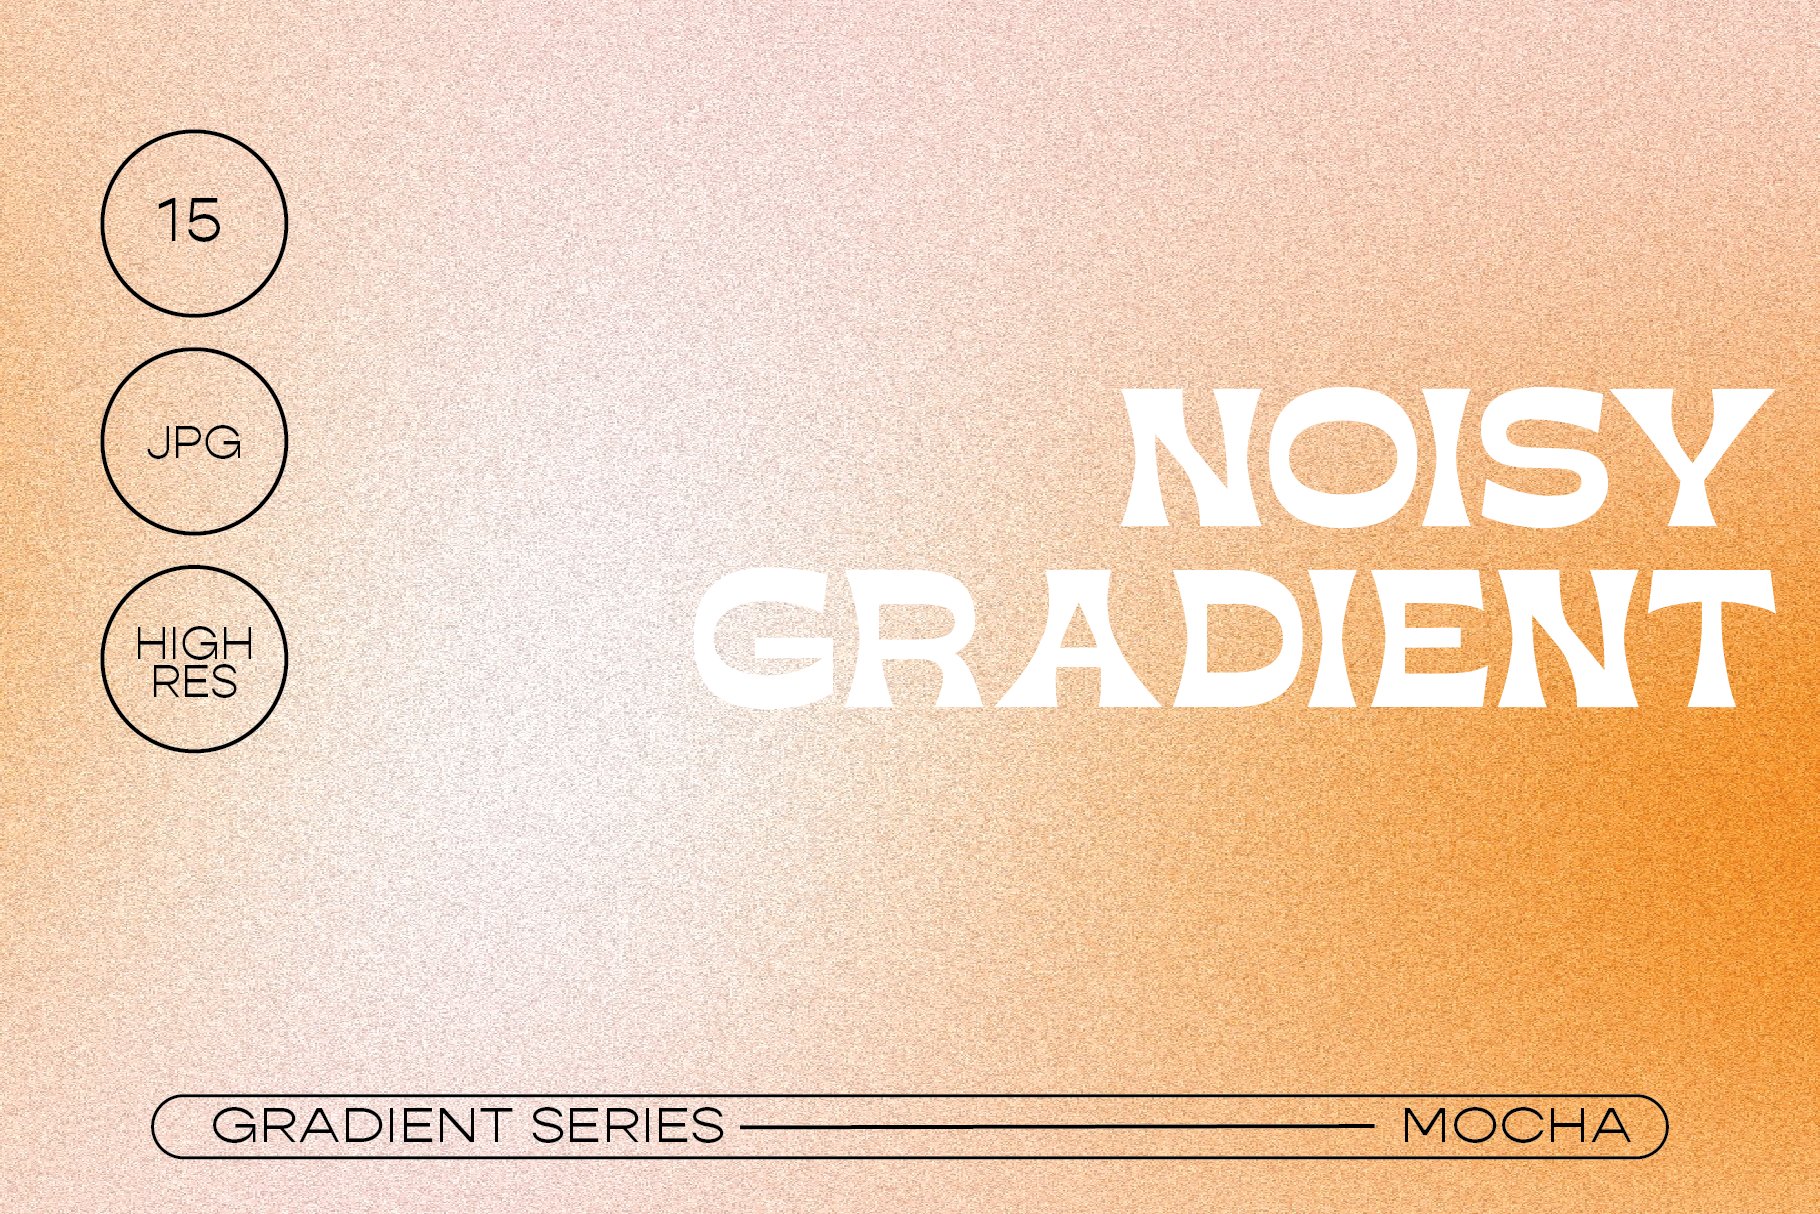 Noisy Gradient | Creamsicle cover image.